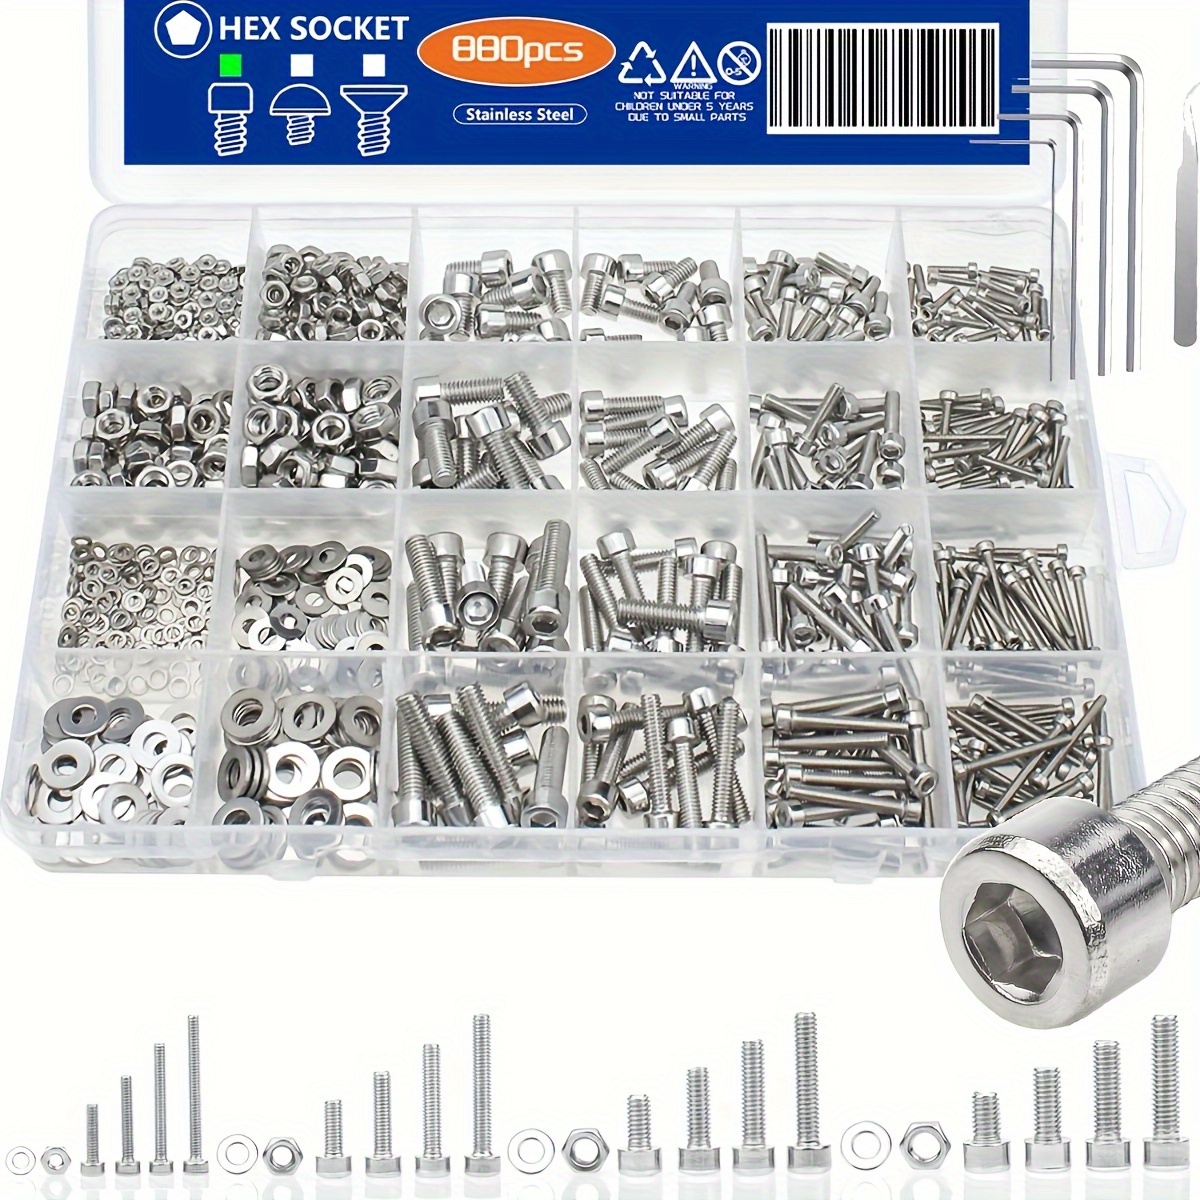 

880pcs Nuts And Bolts Assortment Kit, M2 M3 M4 M5 Hex Head Assortment Stainless Steel Bolts Nuts Flat Washers Nuts Bolts With Case